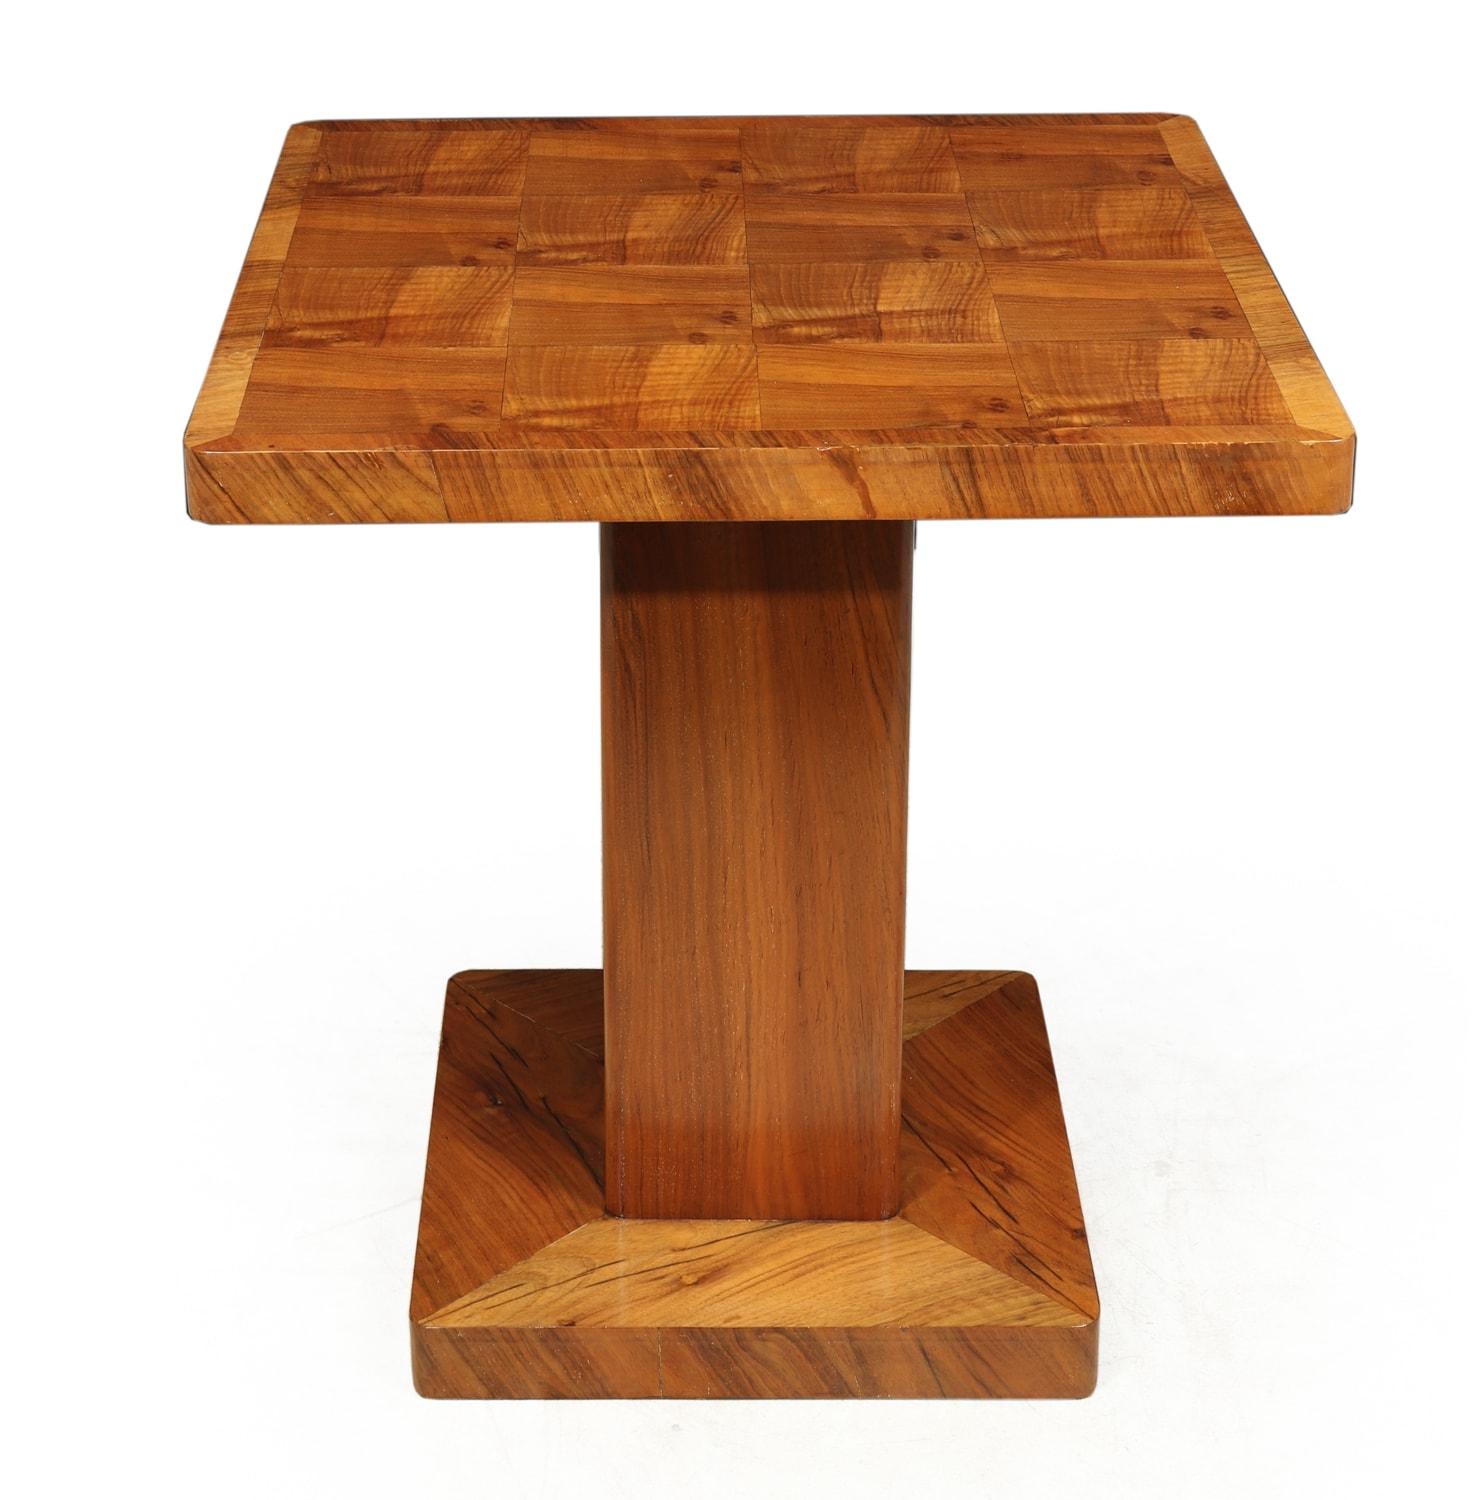 Art Deco walnut table, circa 1930
An English Art Deco walnut table with bookmatched chequre board design top, on square central plinth and base, the table is in very good condition and has been fully hand polished

Age: circa 1930

Style: Art